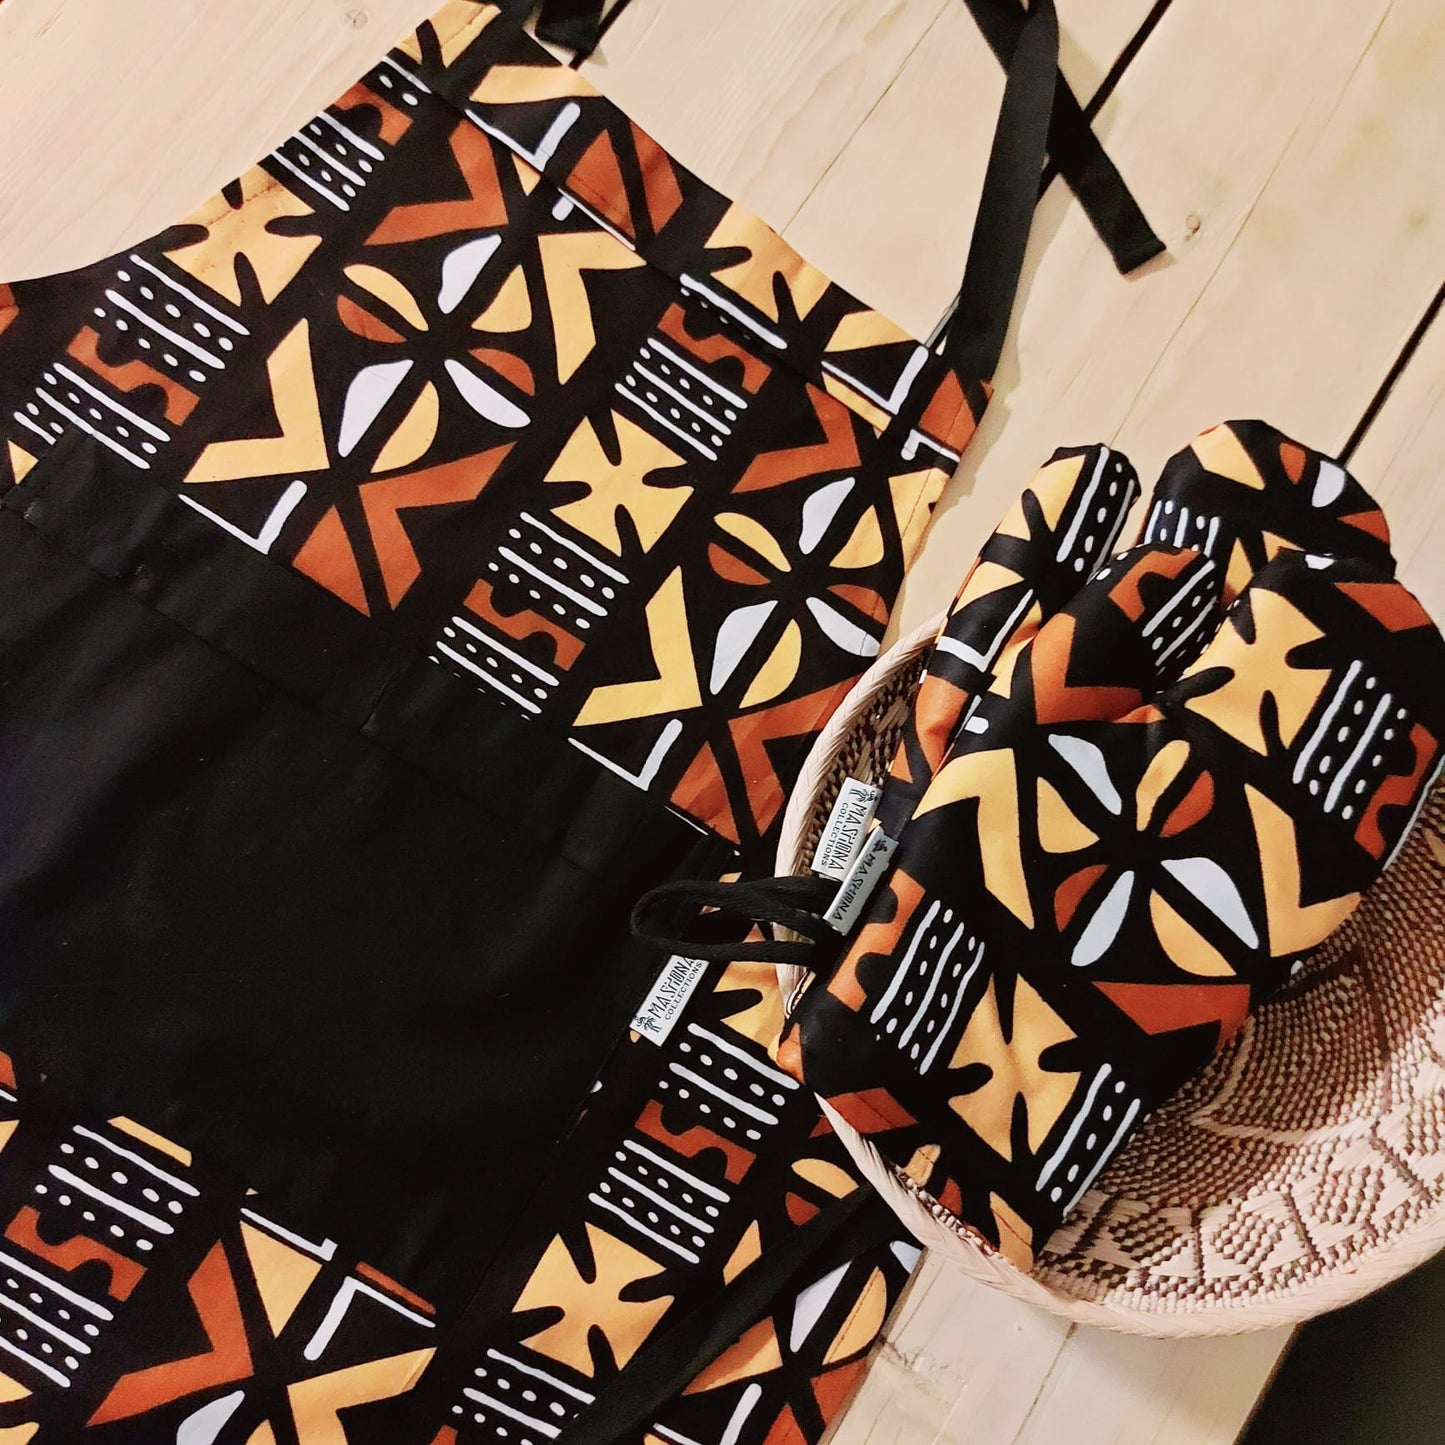 Handmade Apron and Oven Gloves Set | Made from 100% African Print Cotton | African Print Apron